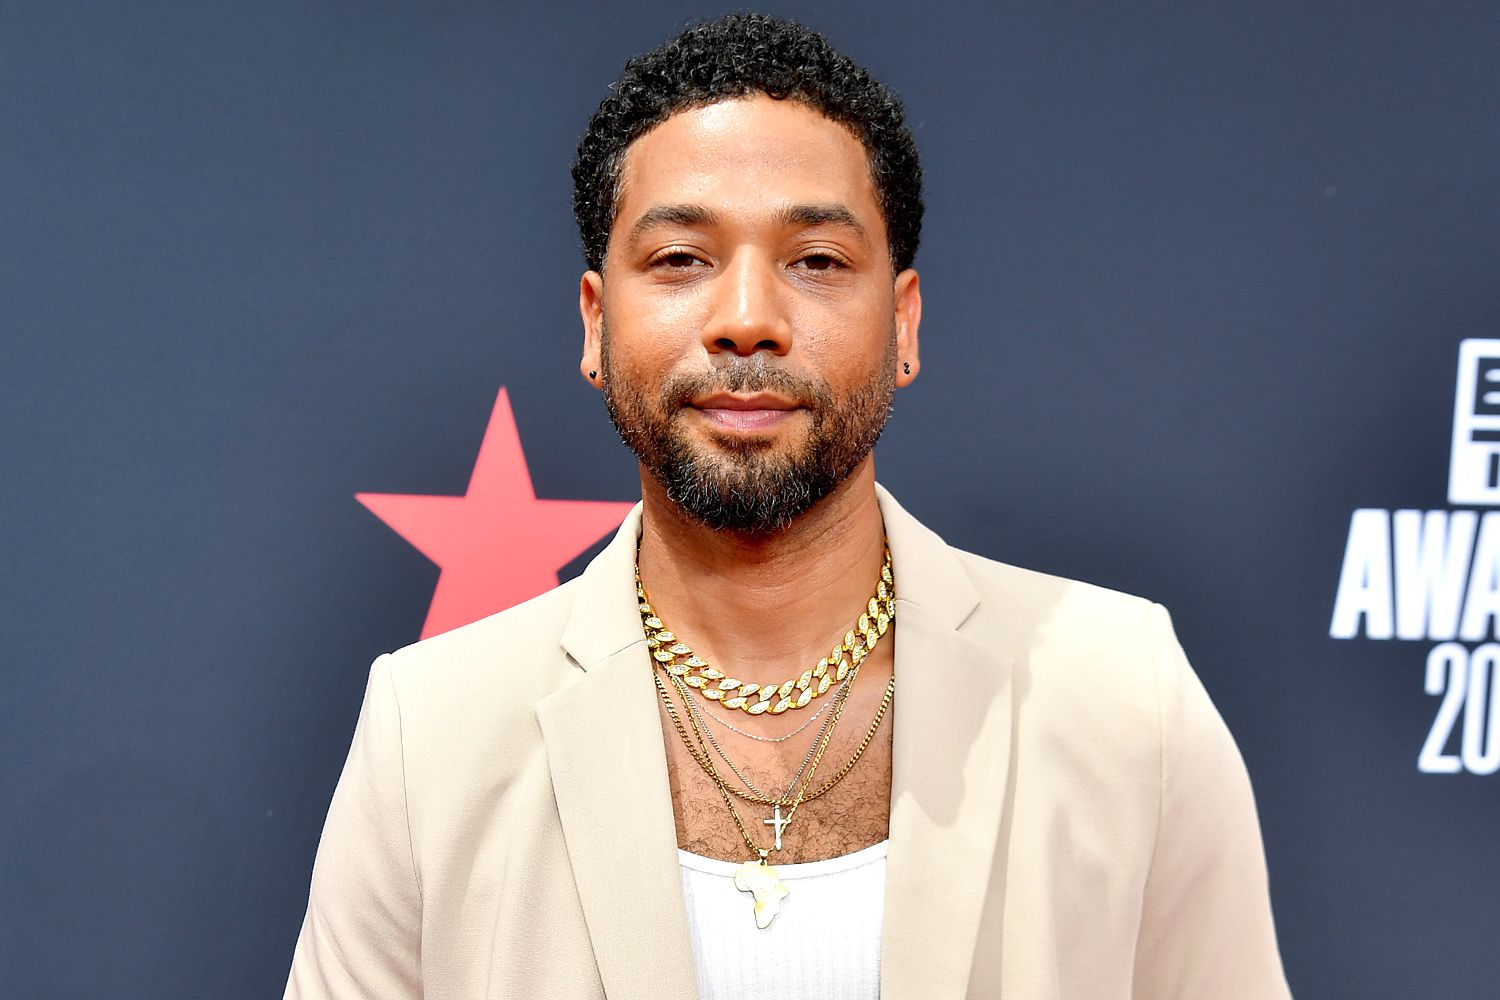 Jussie Smollett Reconnects With ‘Empire’ Showrunner Amid Ongoing Legal Challenges